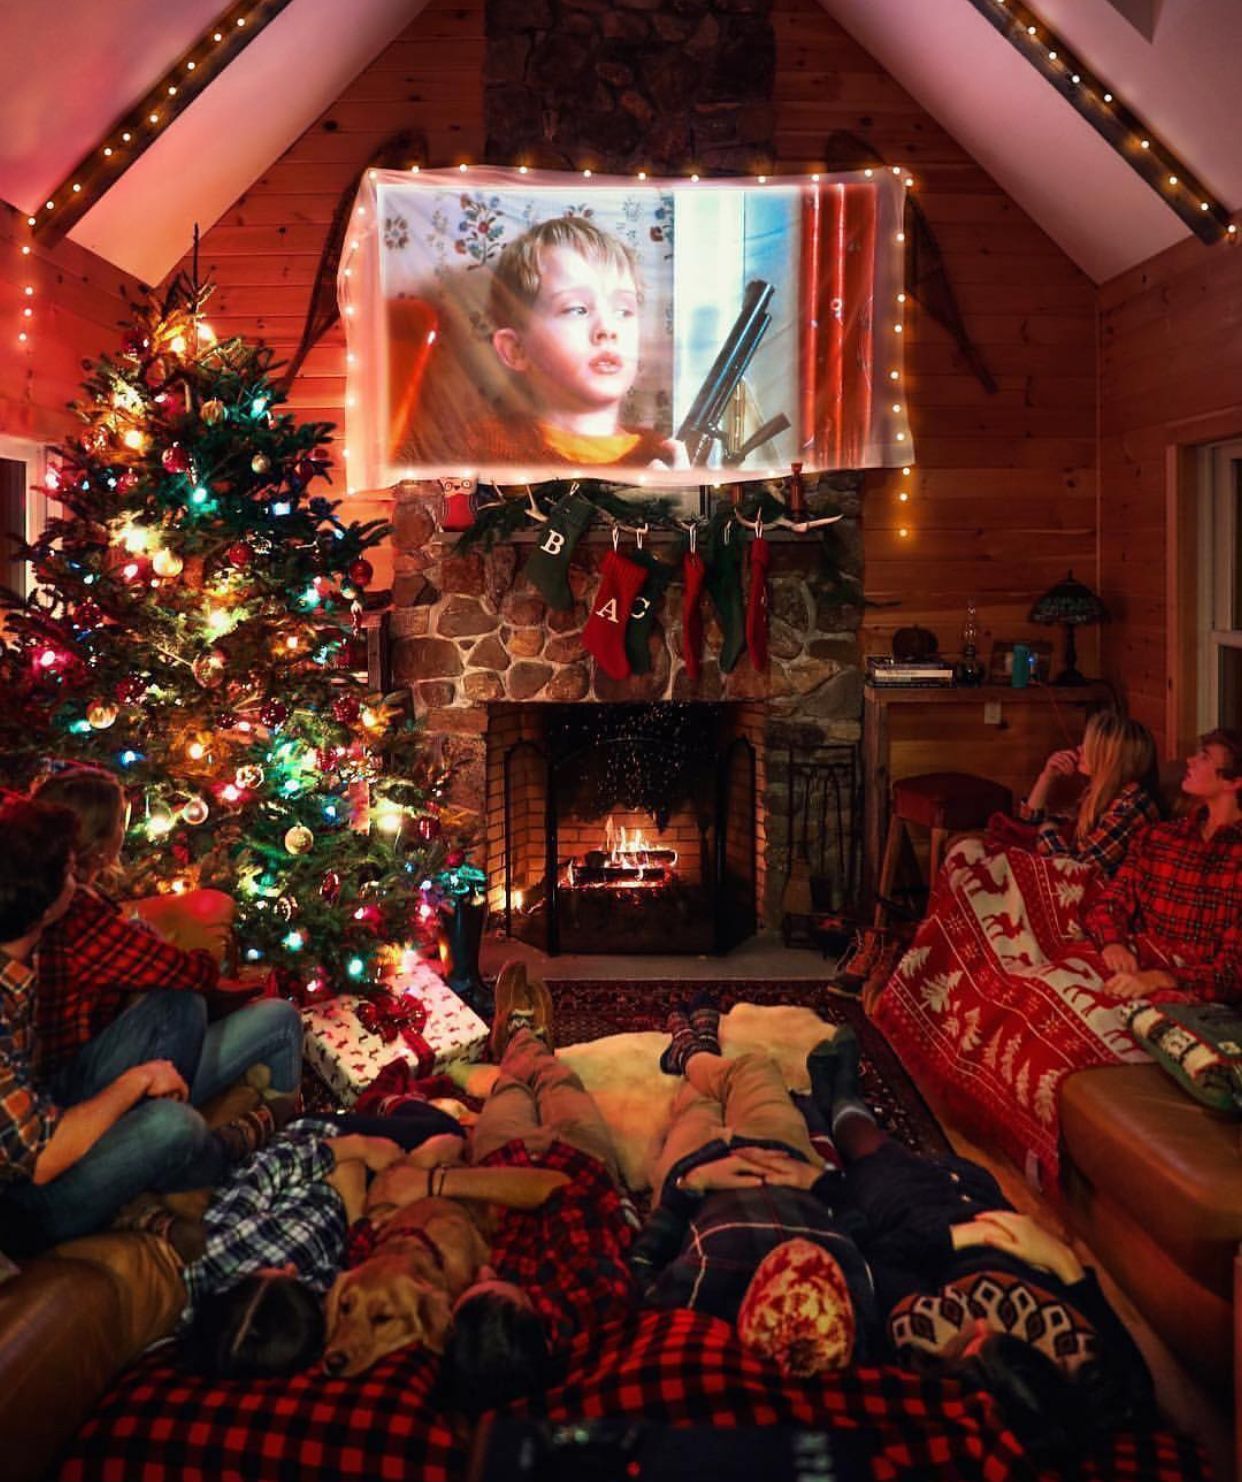 movie night in front the Christmas tree and fireplace, source unknown. Cozy christmas, Christmas wallpaper, Christmas lights